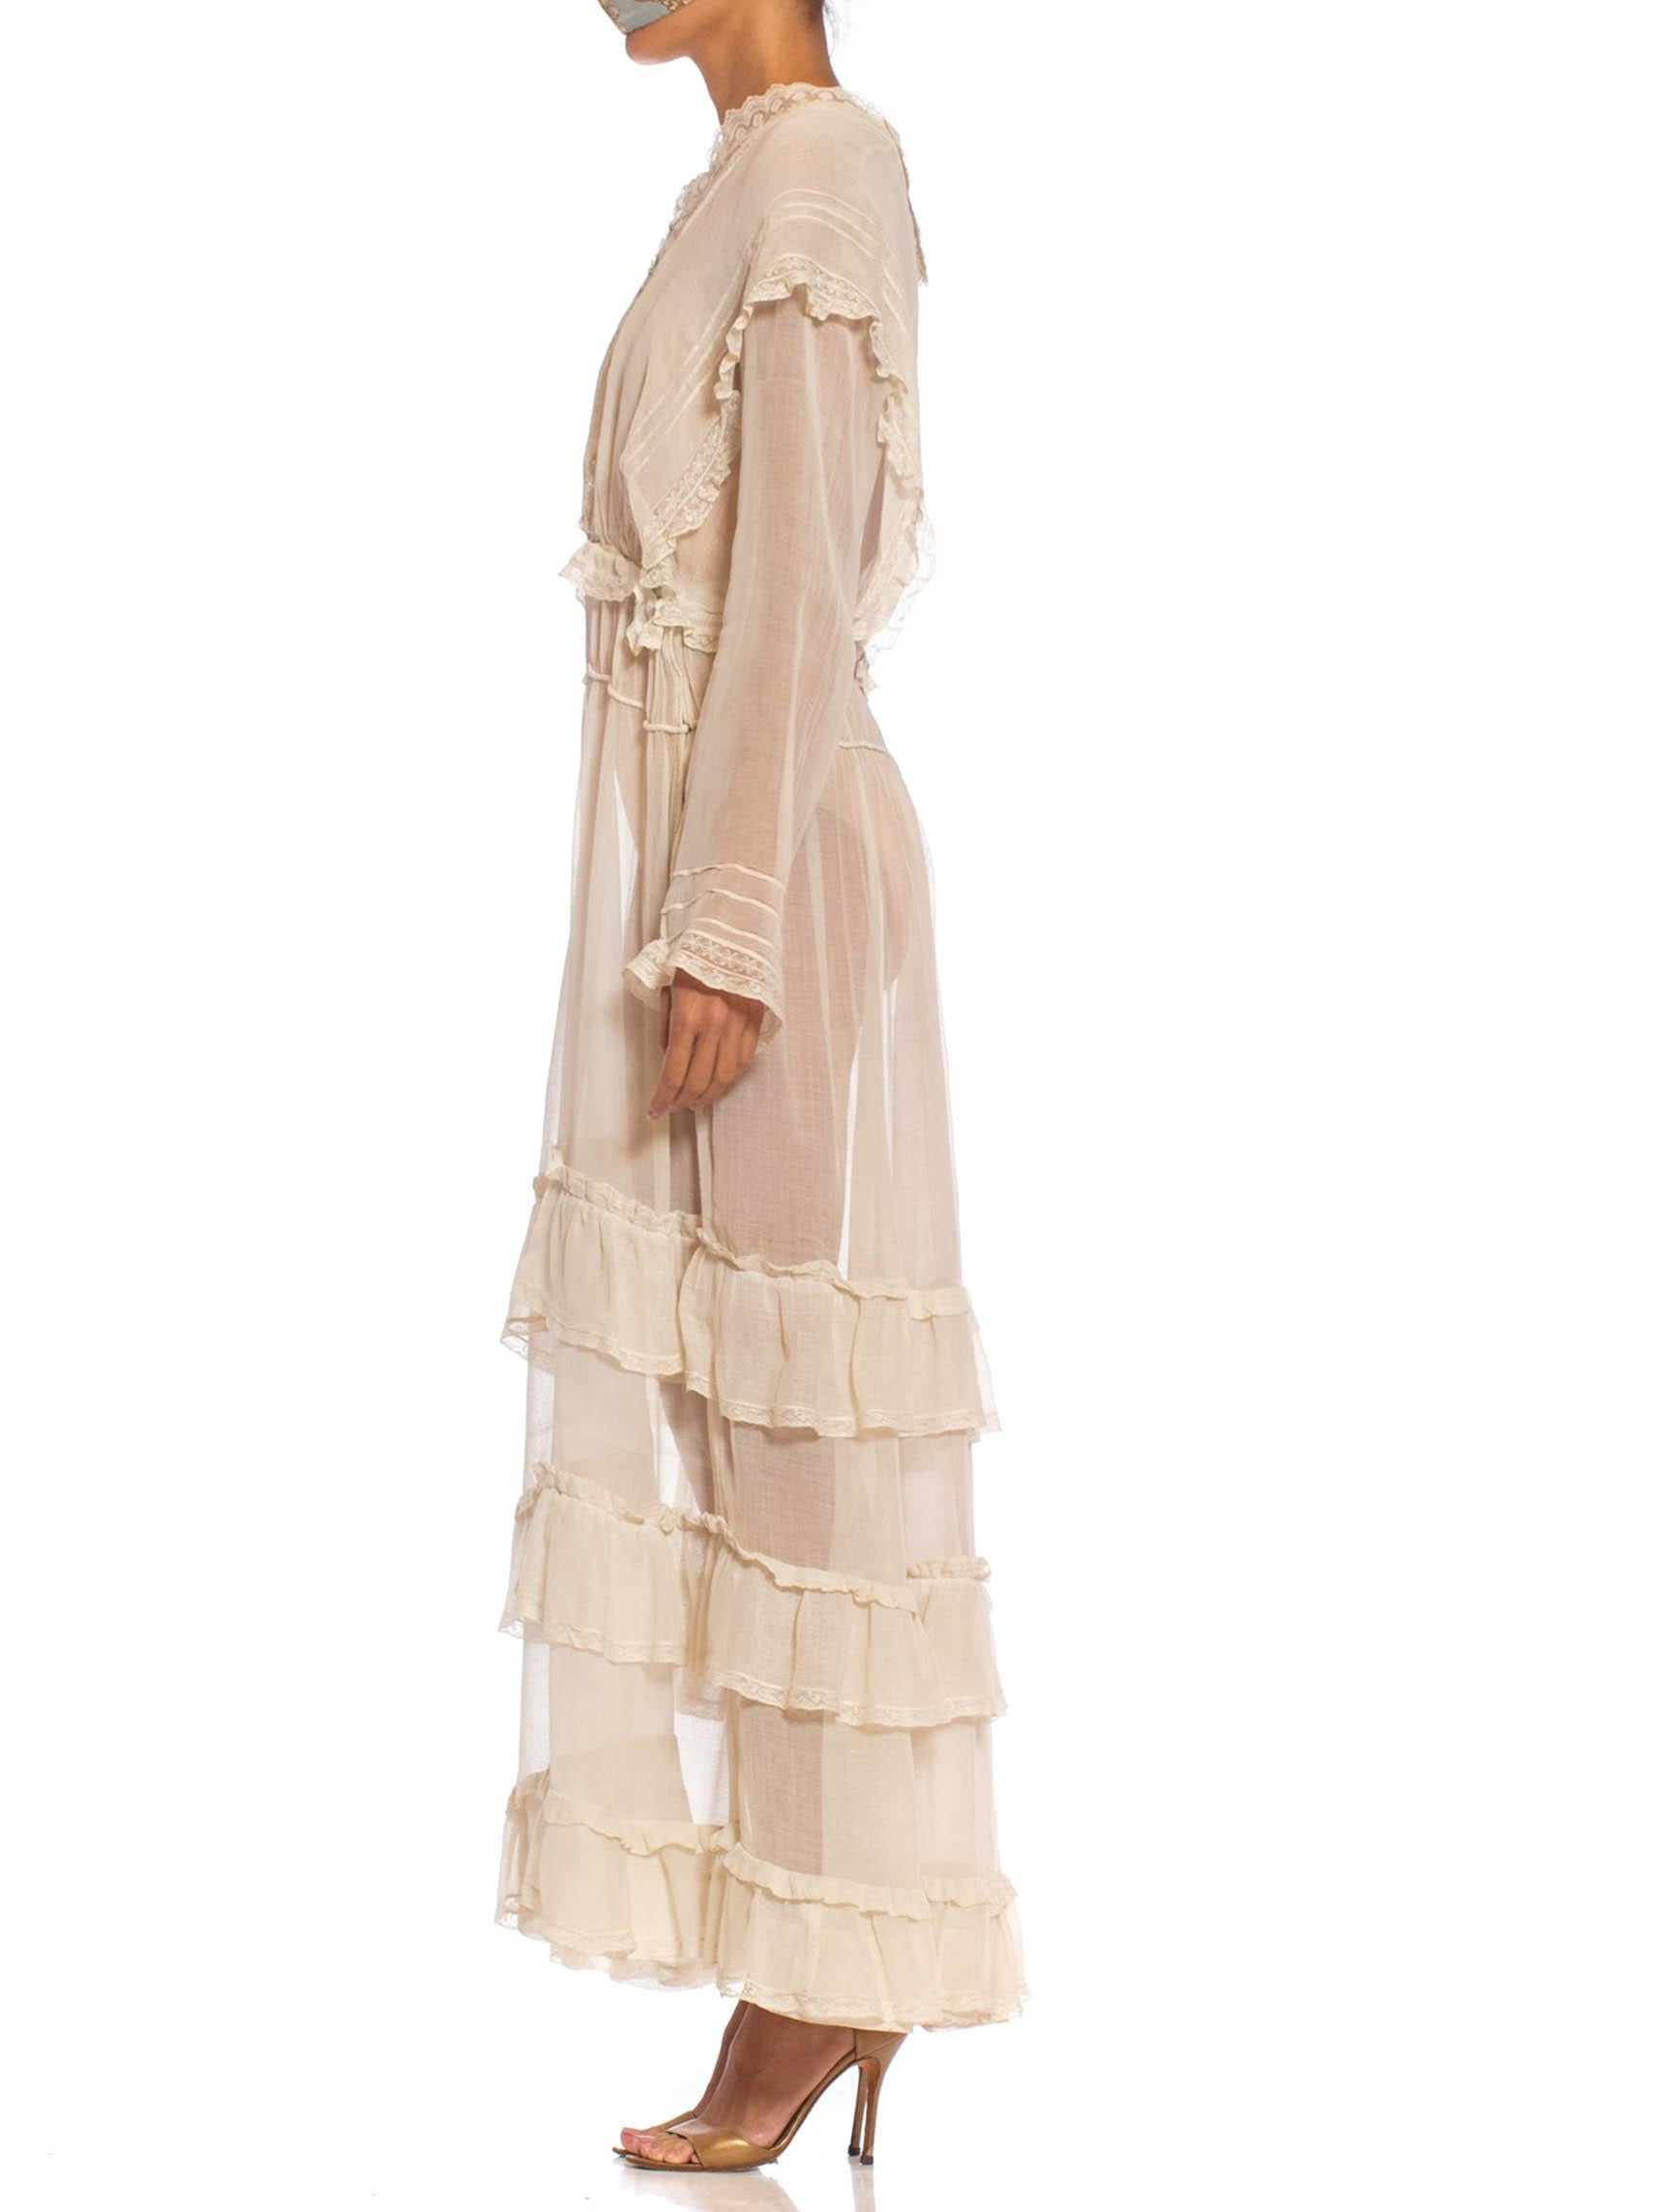 Edwardian Off White Organic Cotton Voile & Lace Long Sleeved Ruffled Tea Dress In Excellent Condition In New York, NY